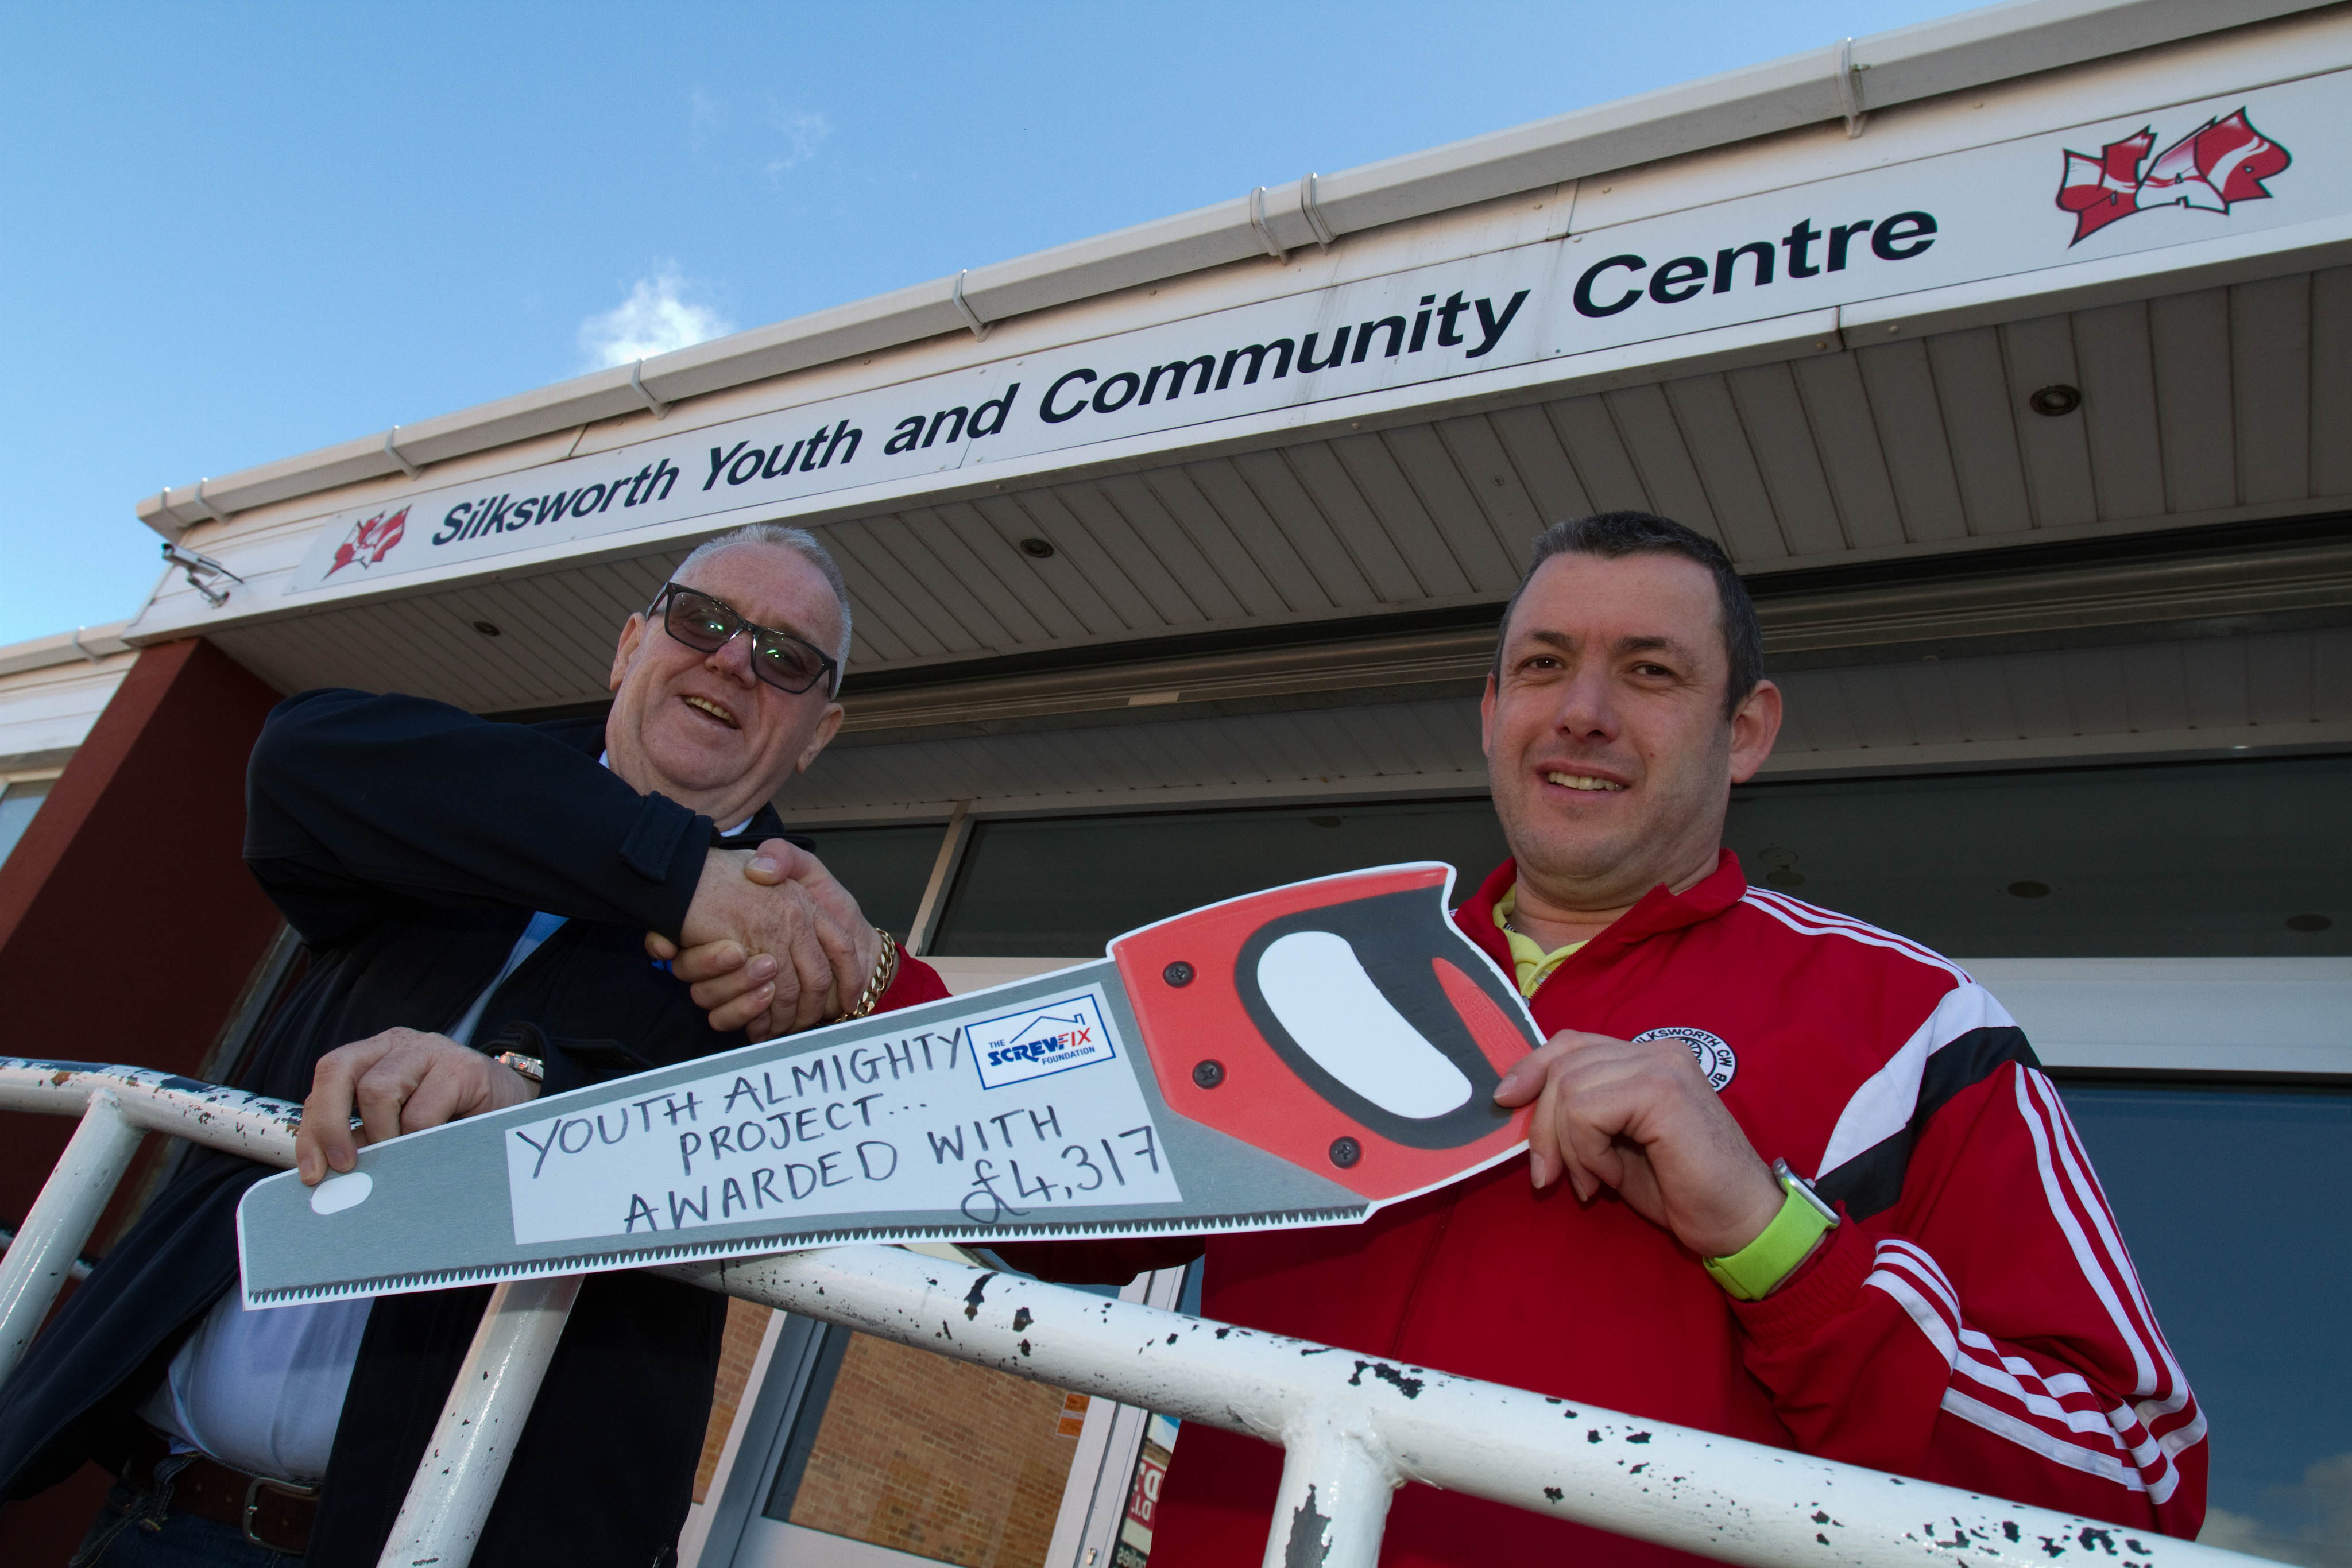 Sunderland based charity gets a helping hand from the Screwfix Foundation